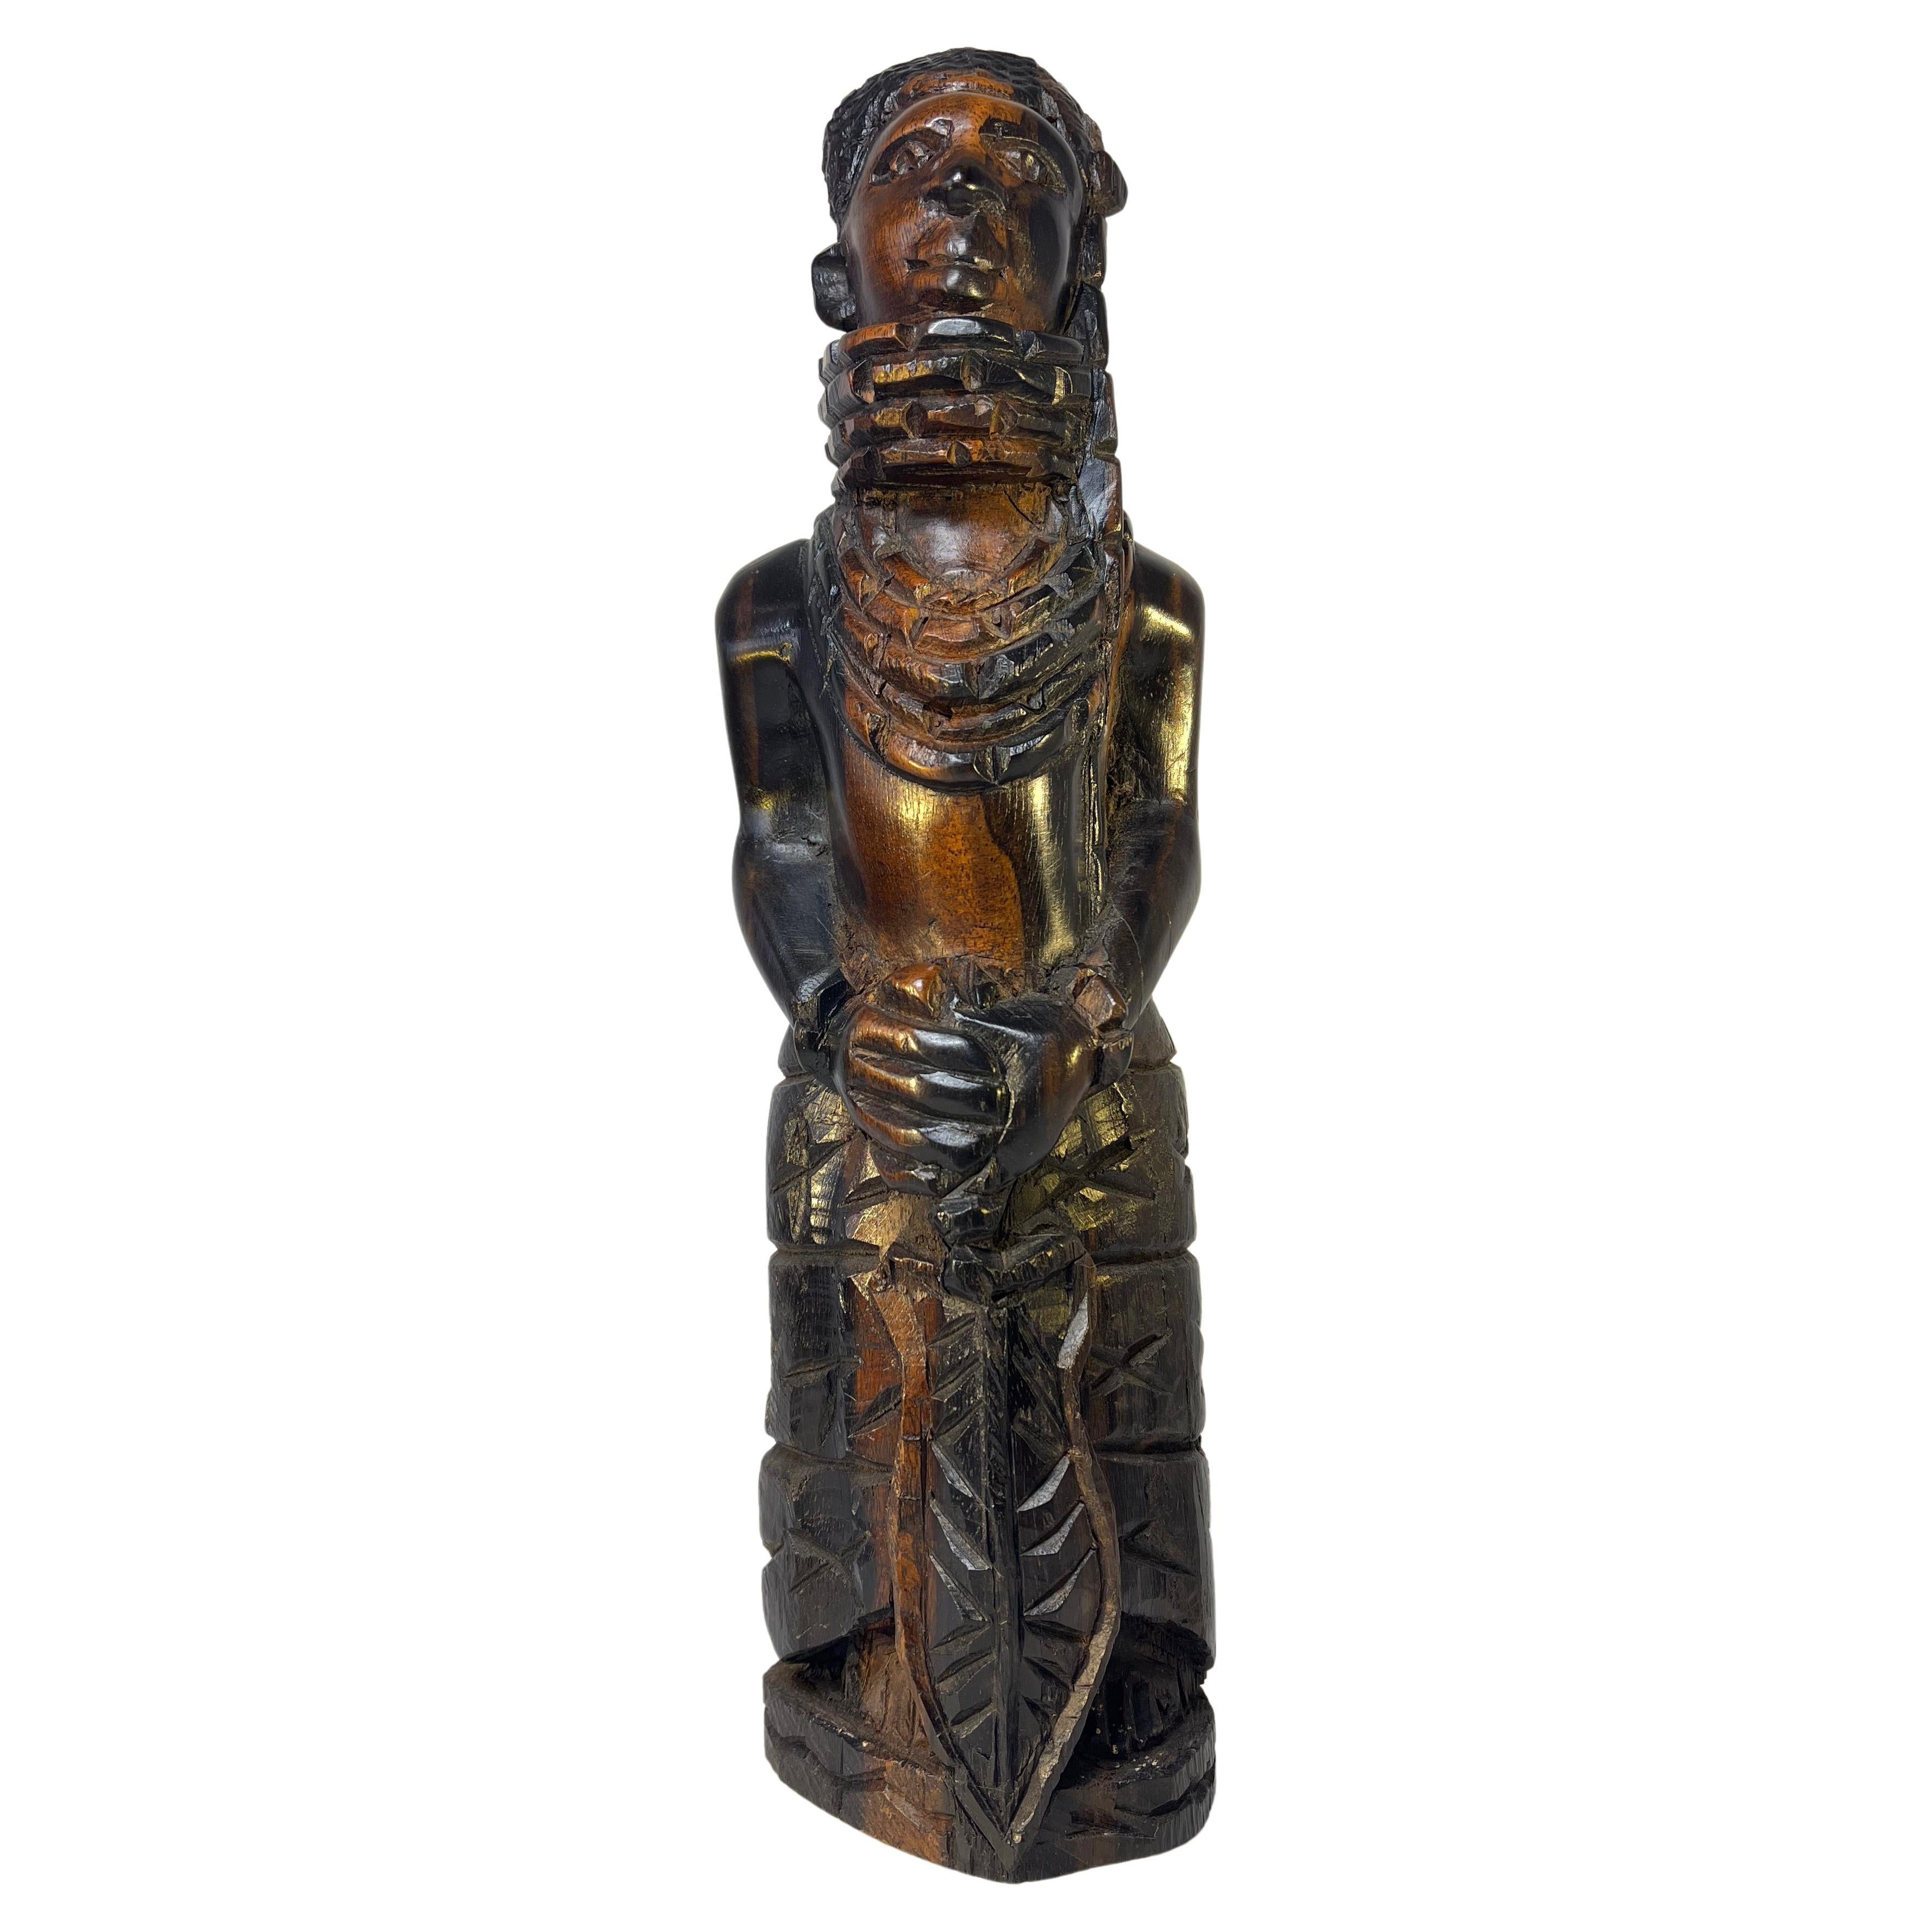 Benin Kingdom Ebony Carving of a Young King Oba, Nigerian For Sale